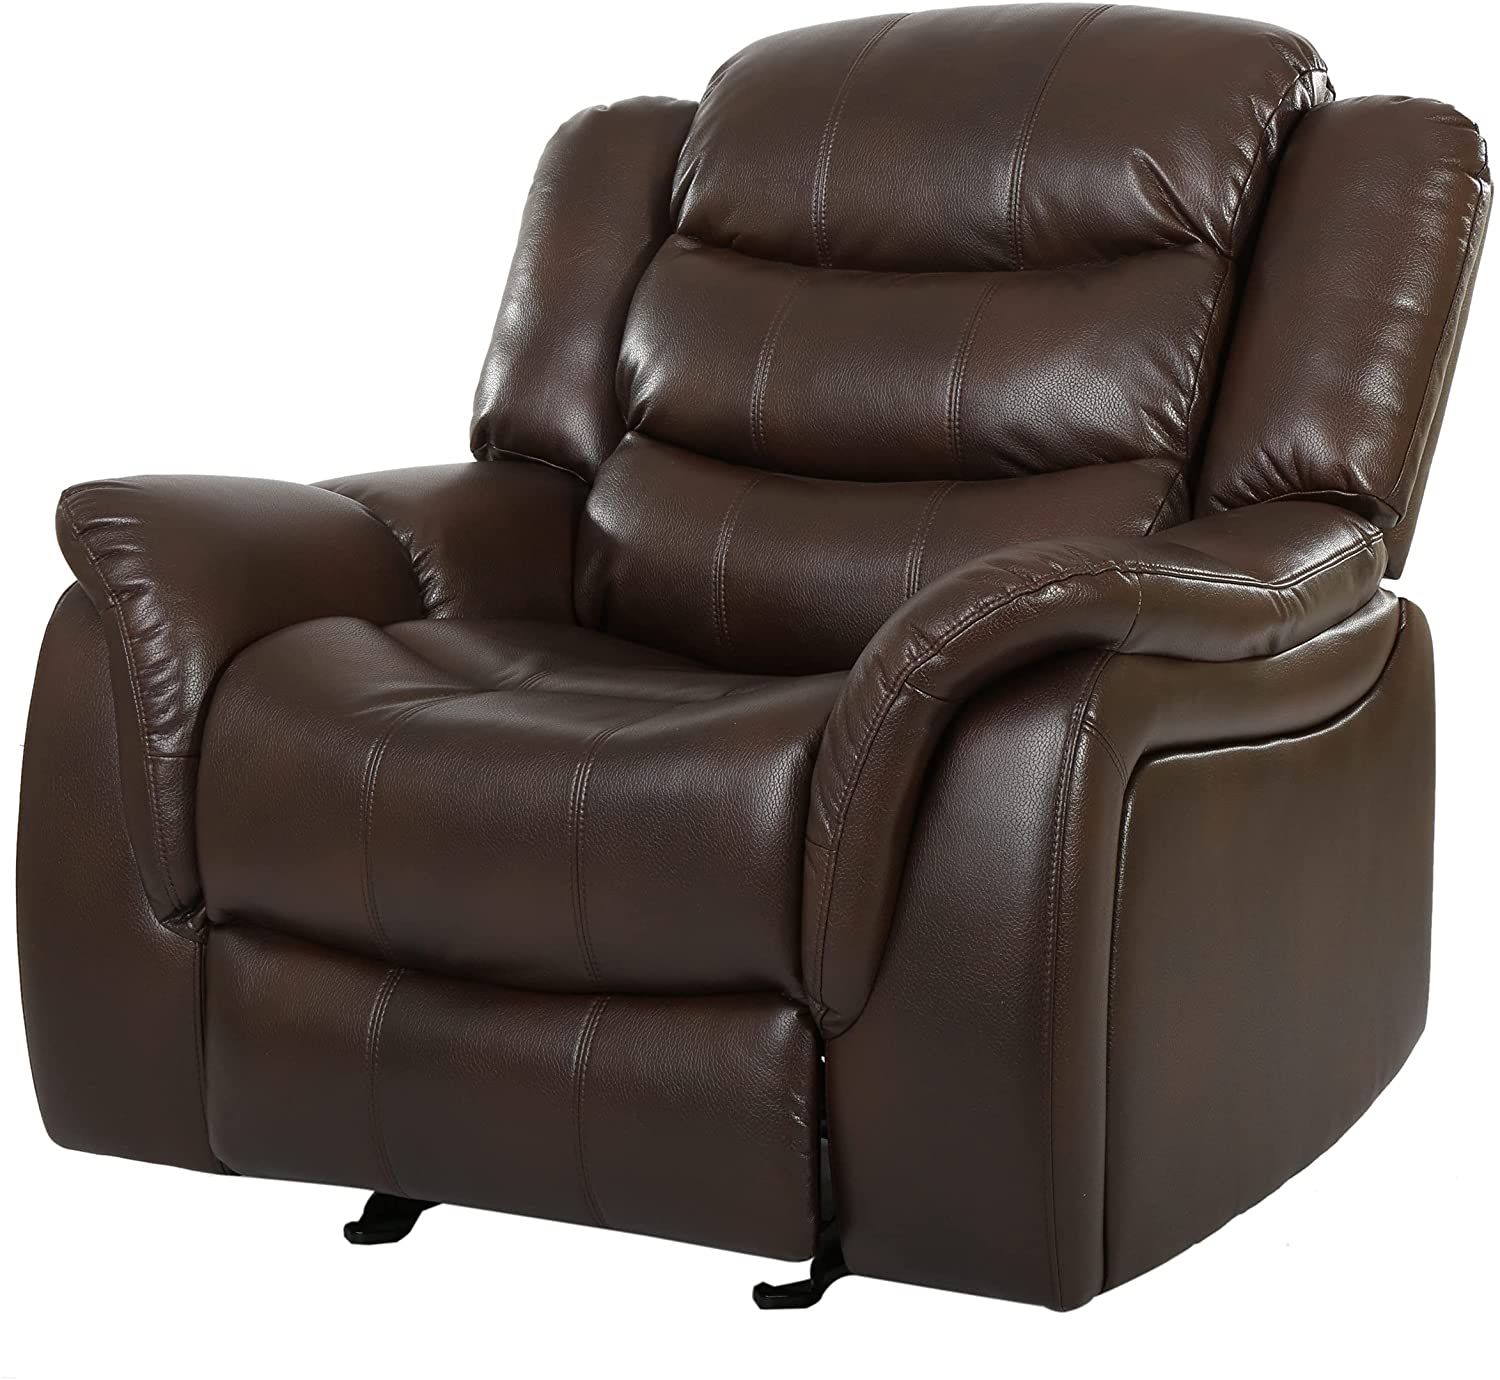 CHRISTOPHER-KNIGHT-HOME-Merit-Dark-Brown-Faux-Leather-Glider-Recliner-Club-Chair